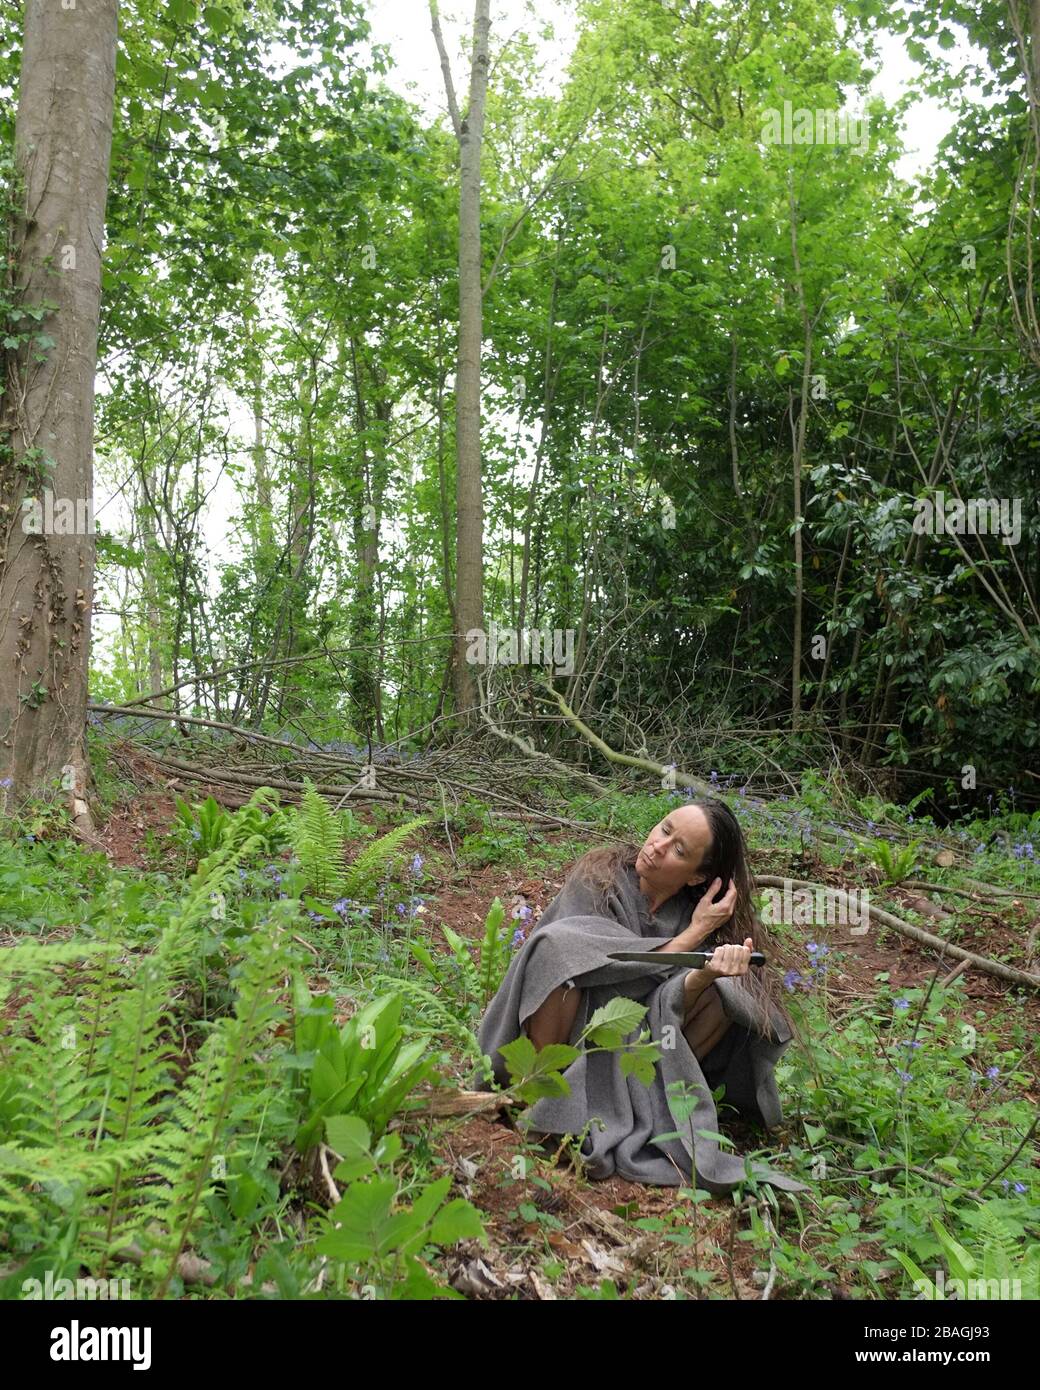 August 2015 - Wild woman in the woods Stock Photo